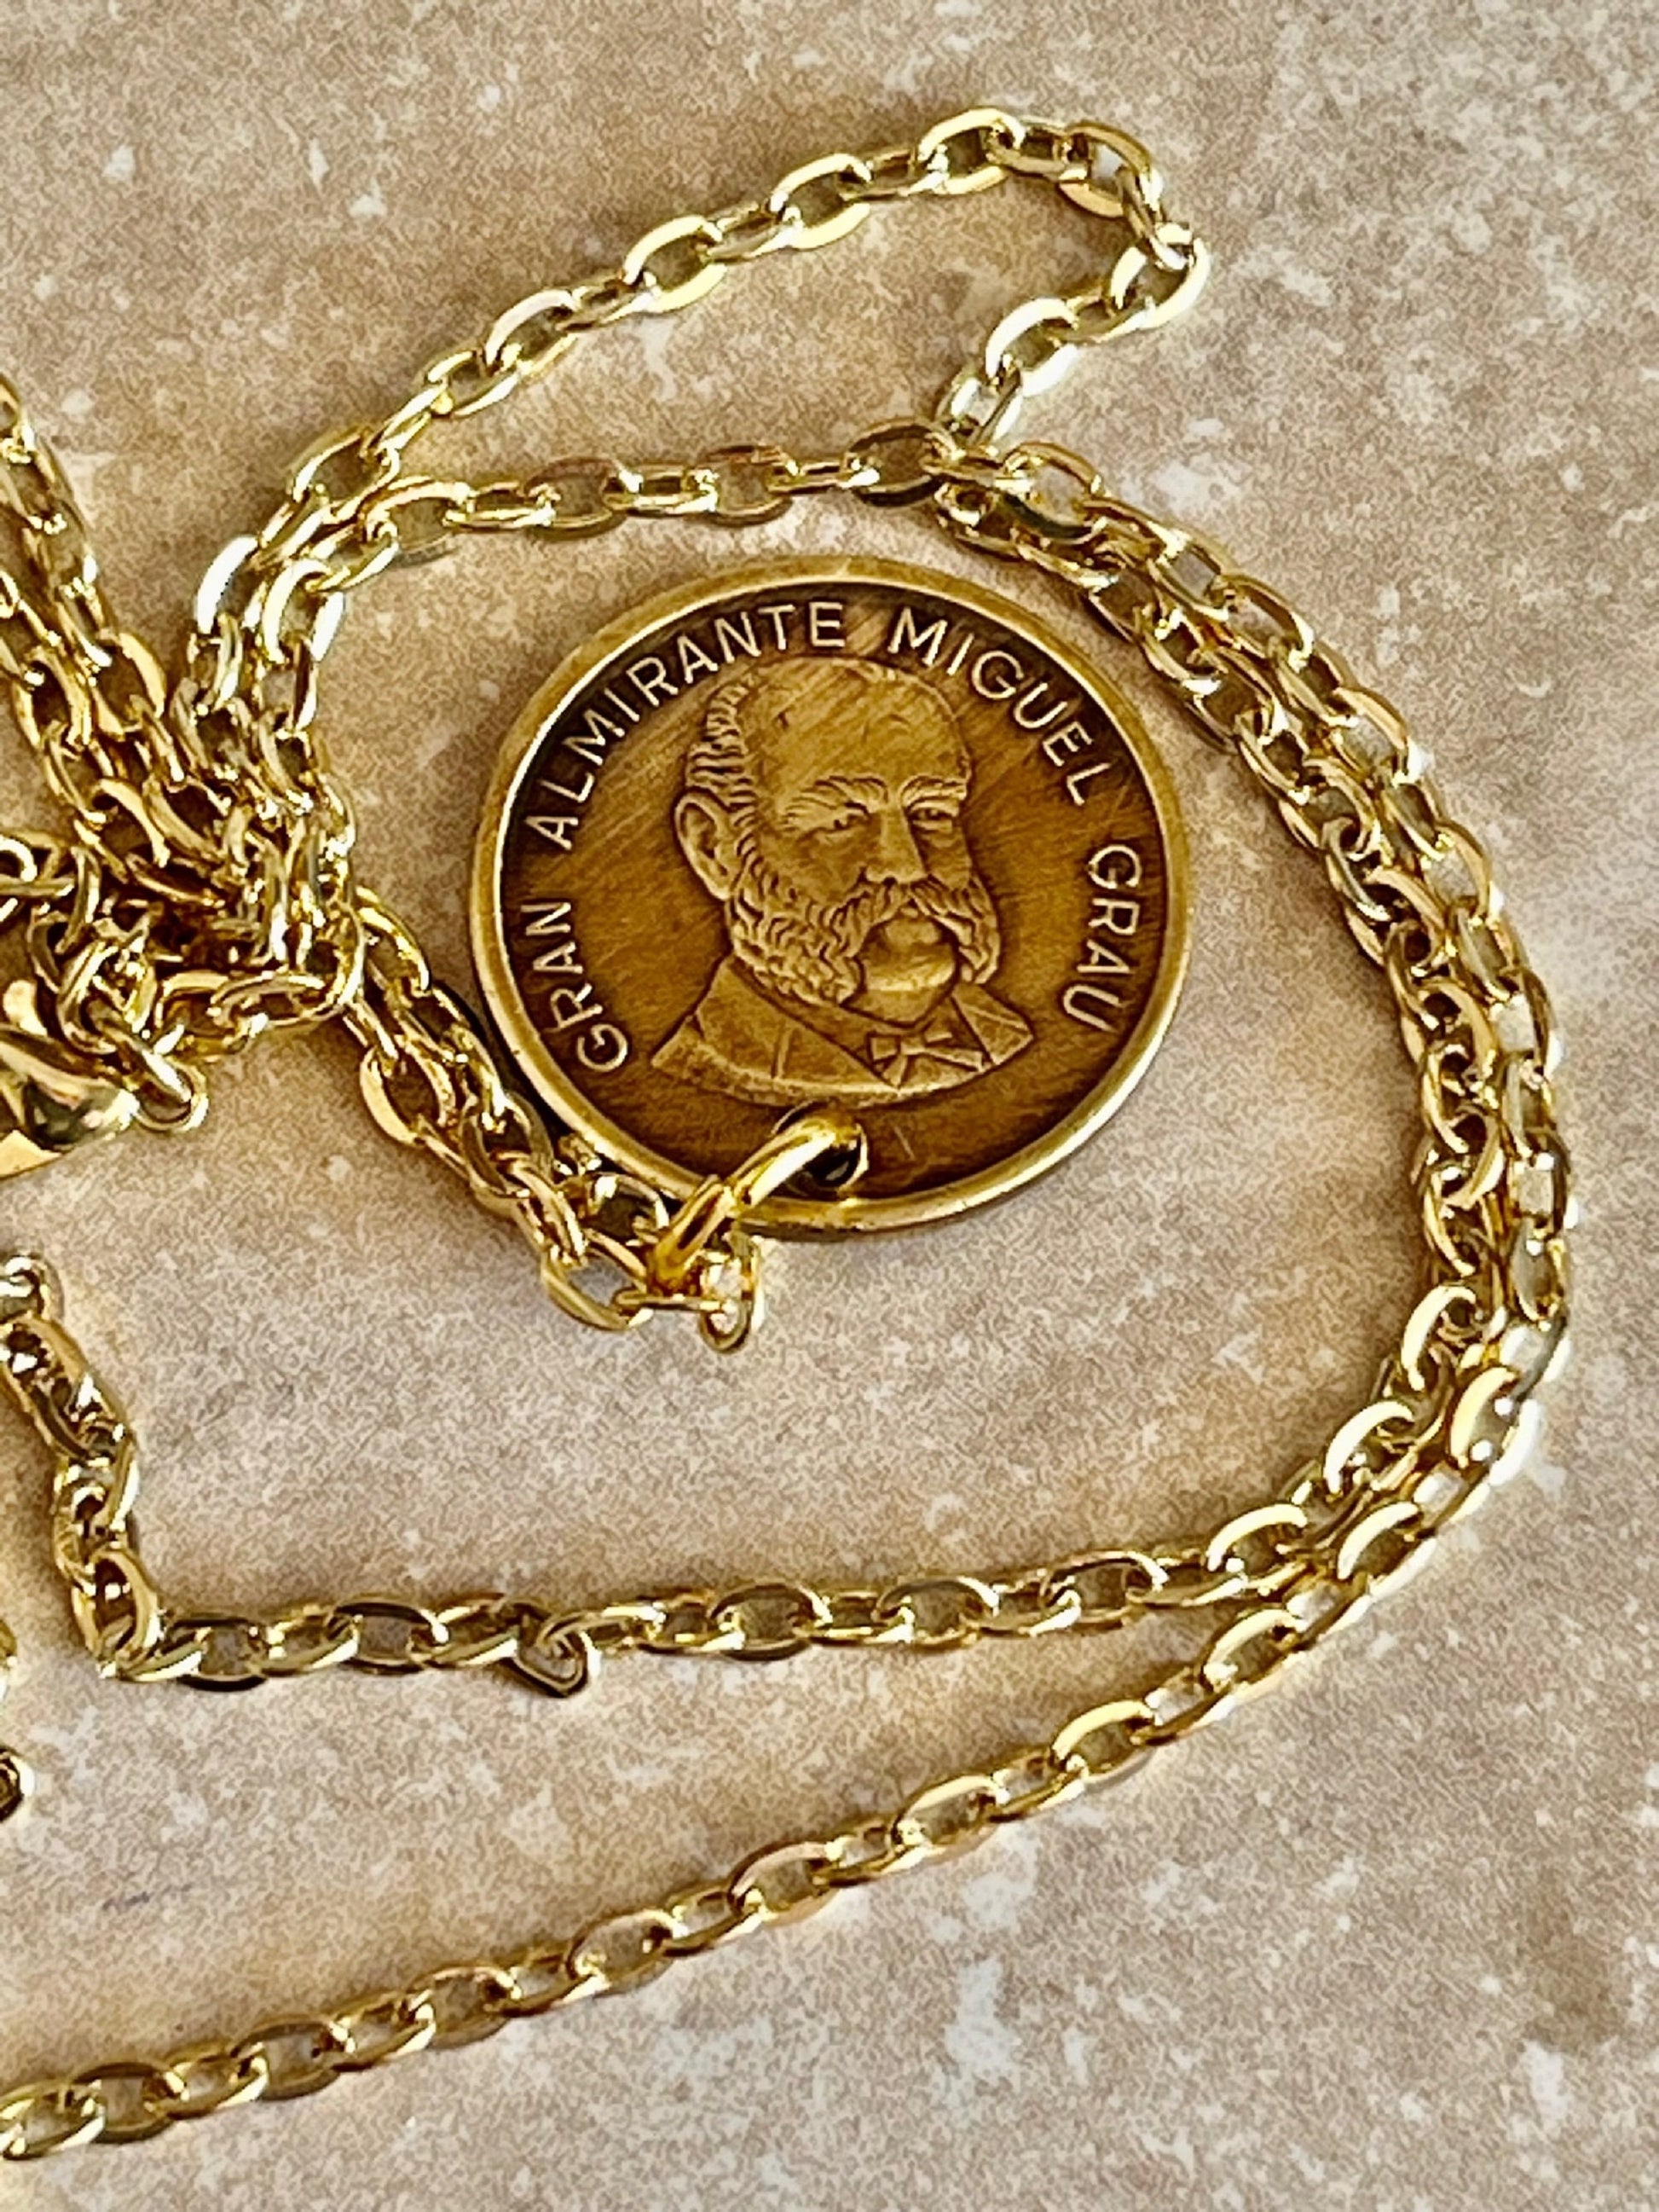 Peru Coin Pendant Peruvian 50 Centimos Personal Necklace Old Vintage Handmade Jewelry Gift Friend Charm For Him Her World Coin Collector